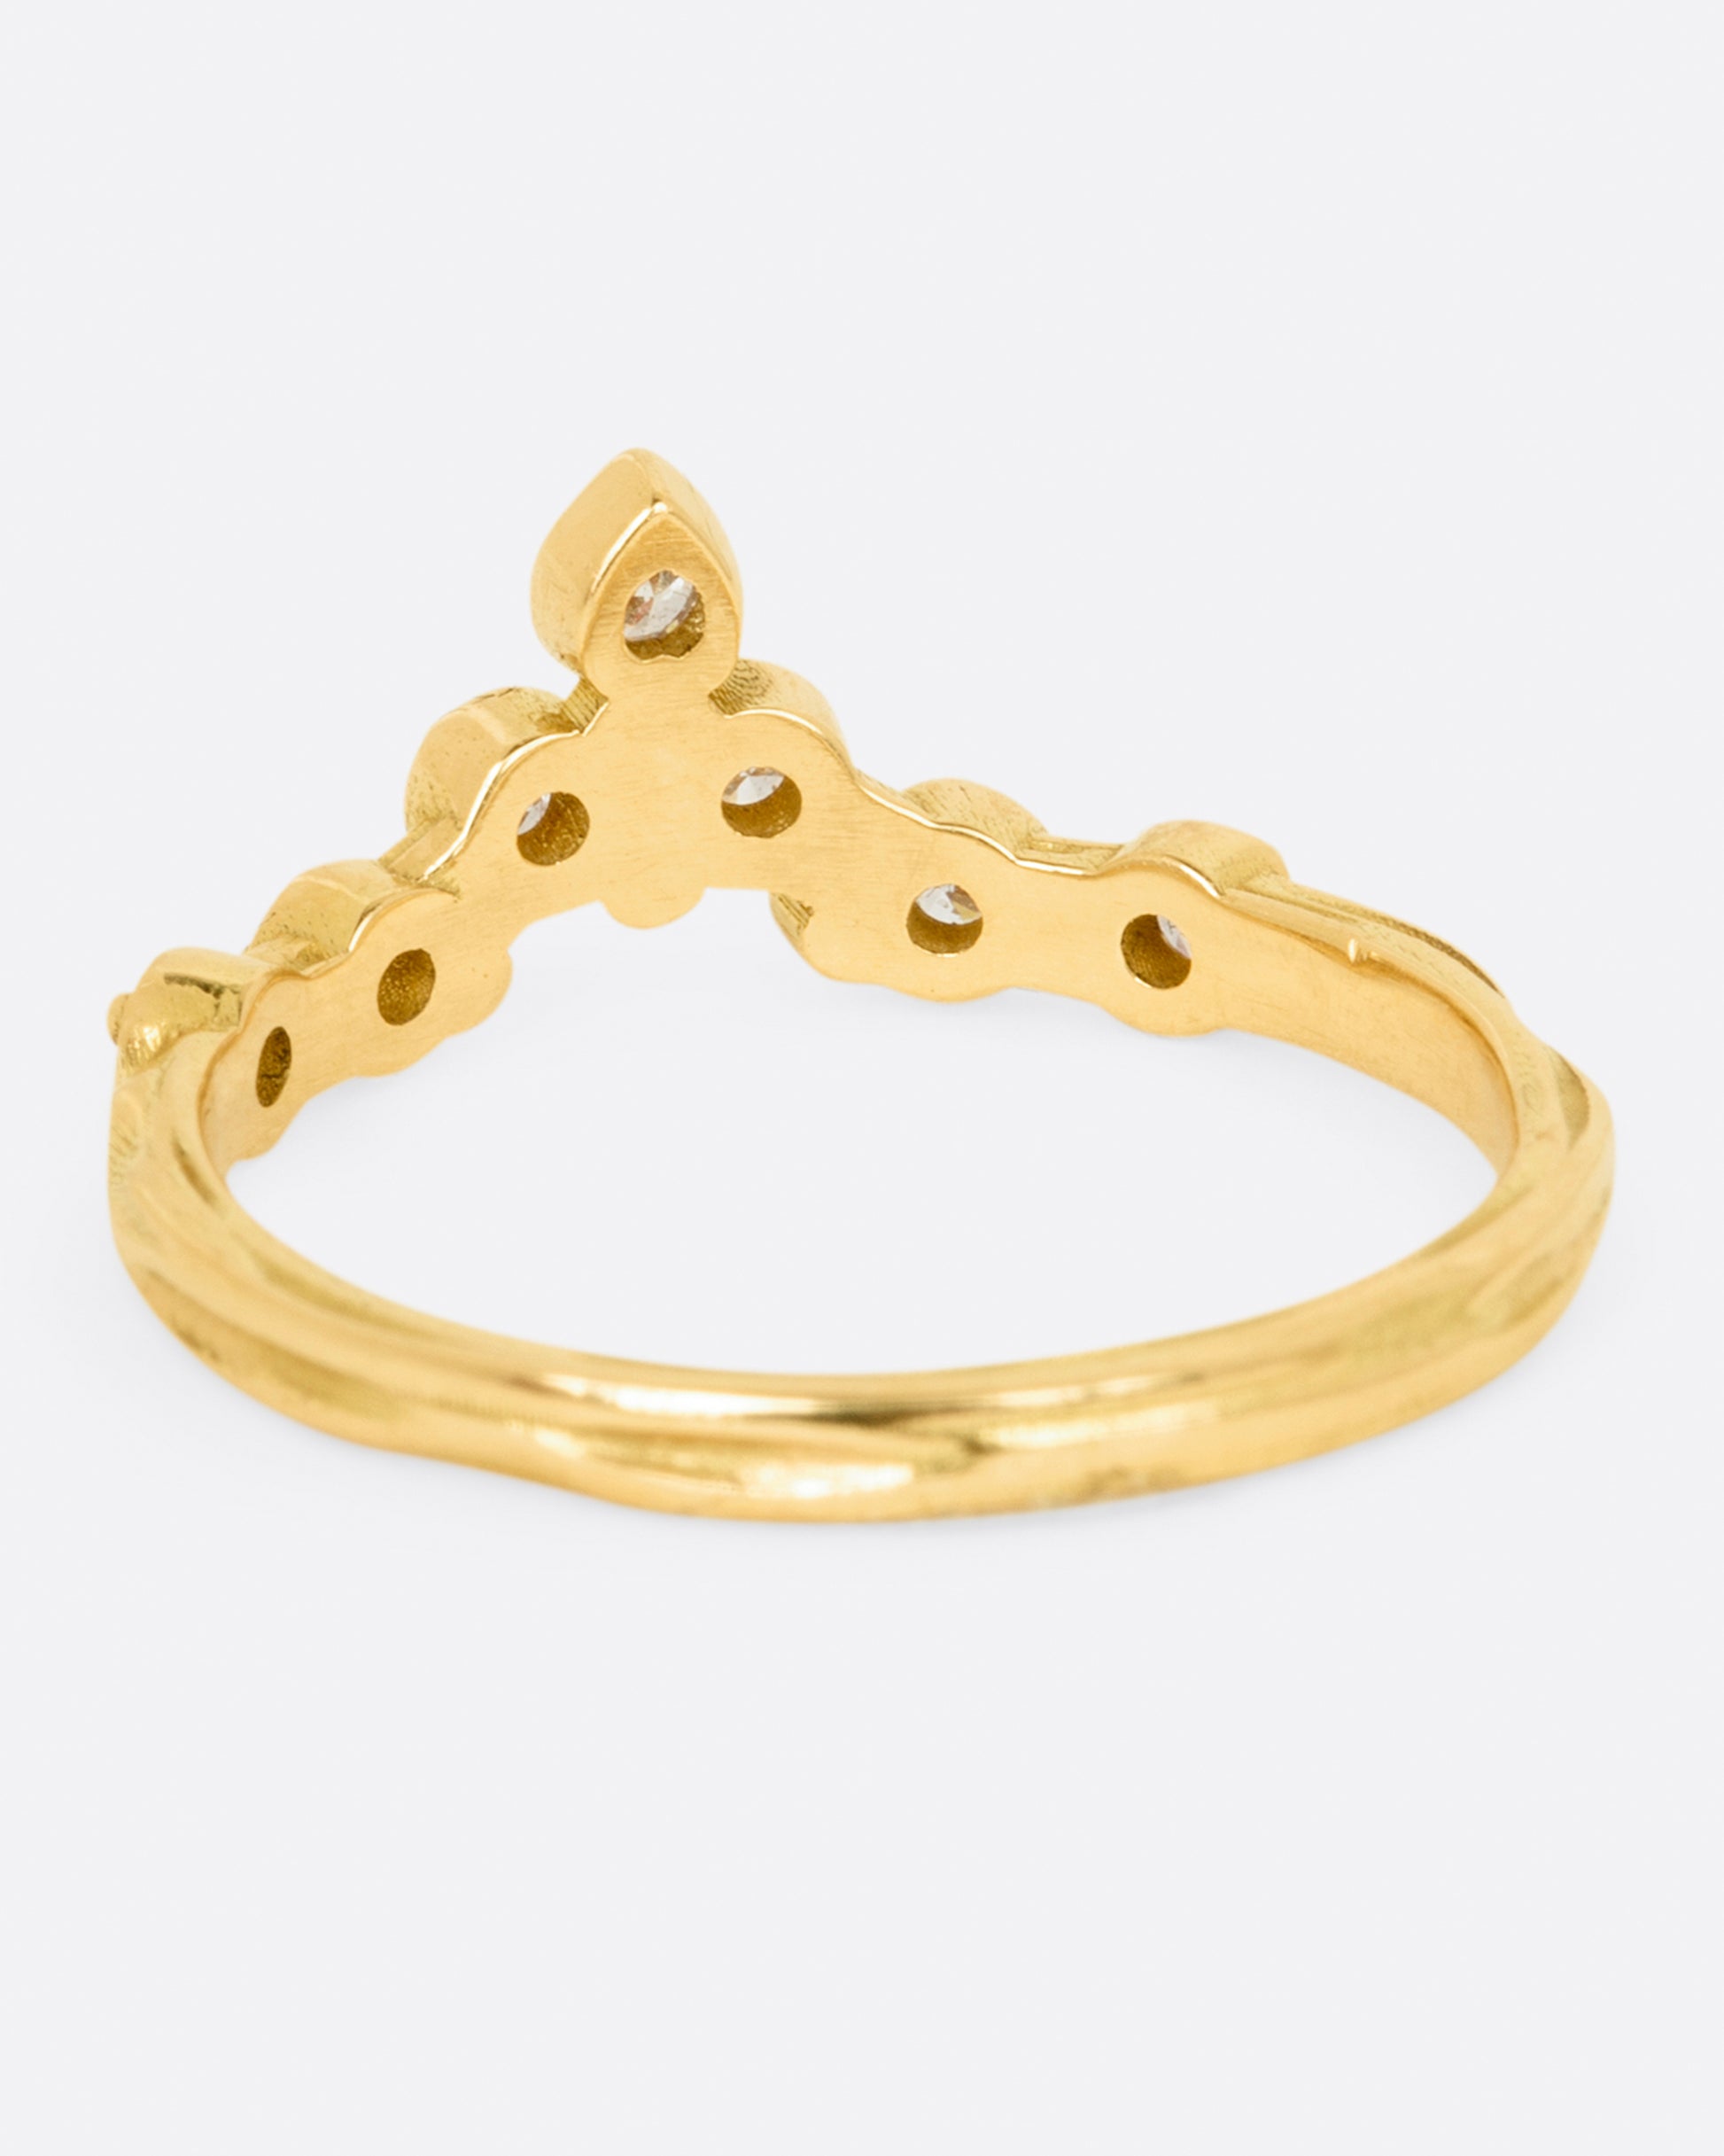 A slightly curved and pointed ring with seven diamonds on a textured band.